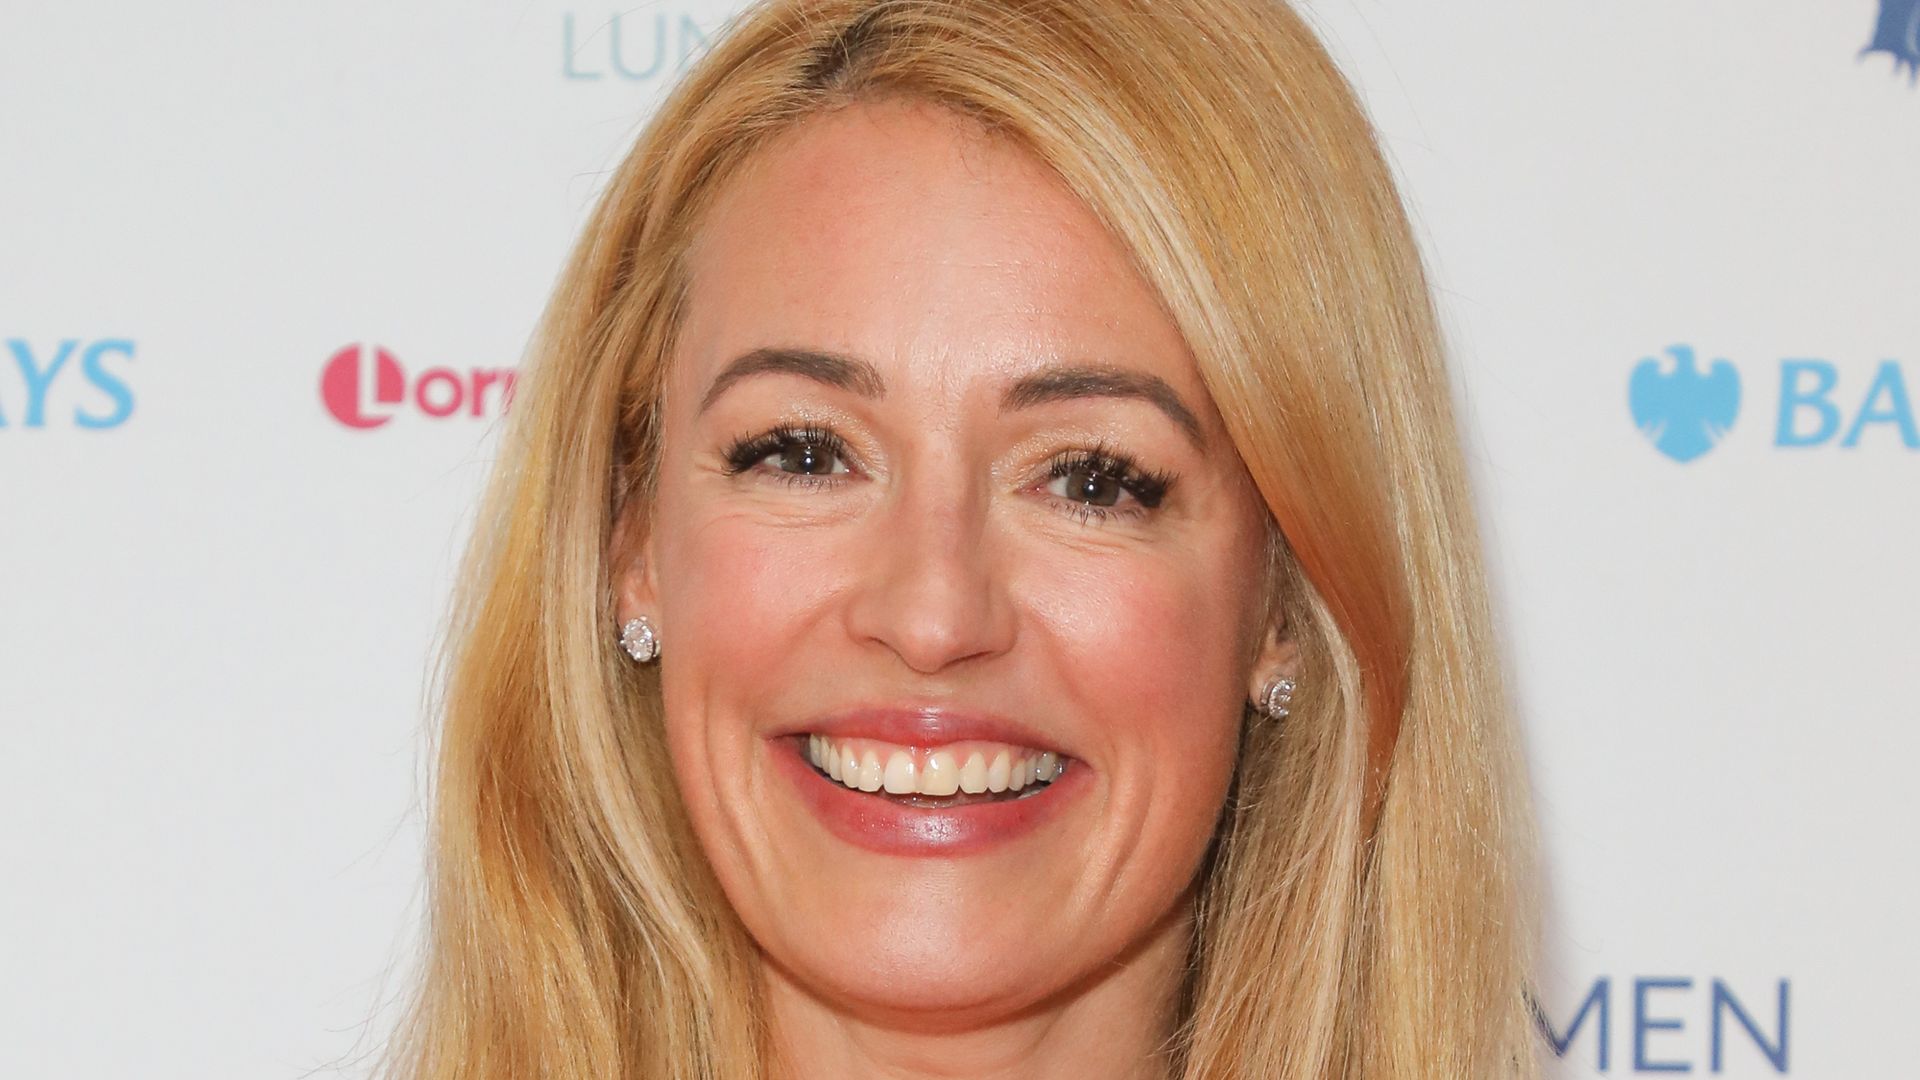 Cat Deeley on the red carpet